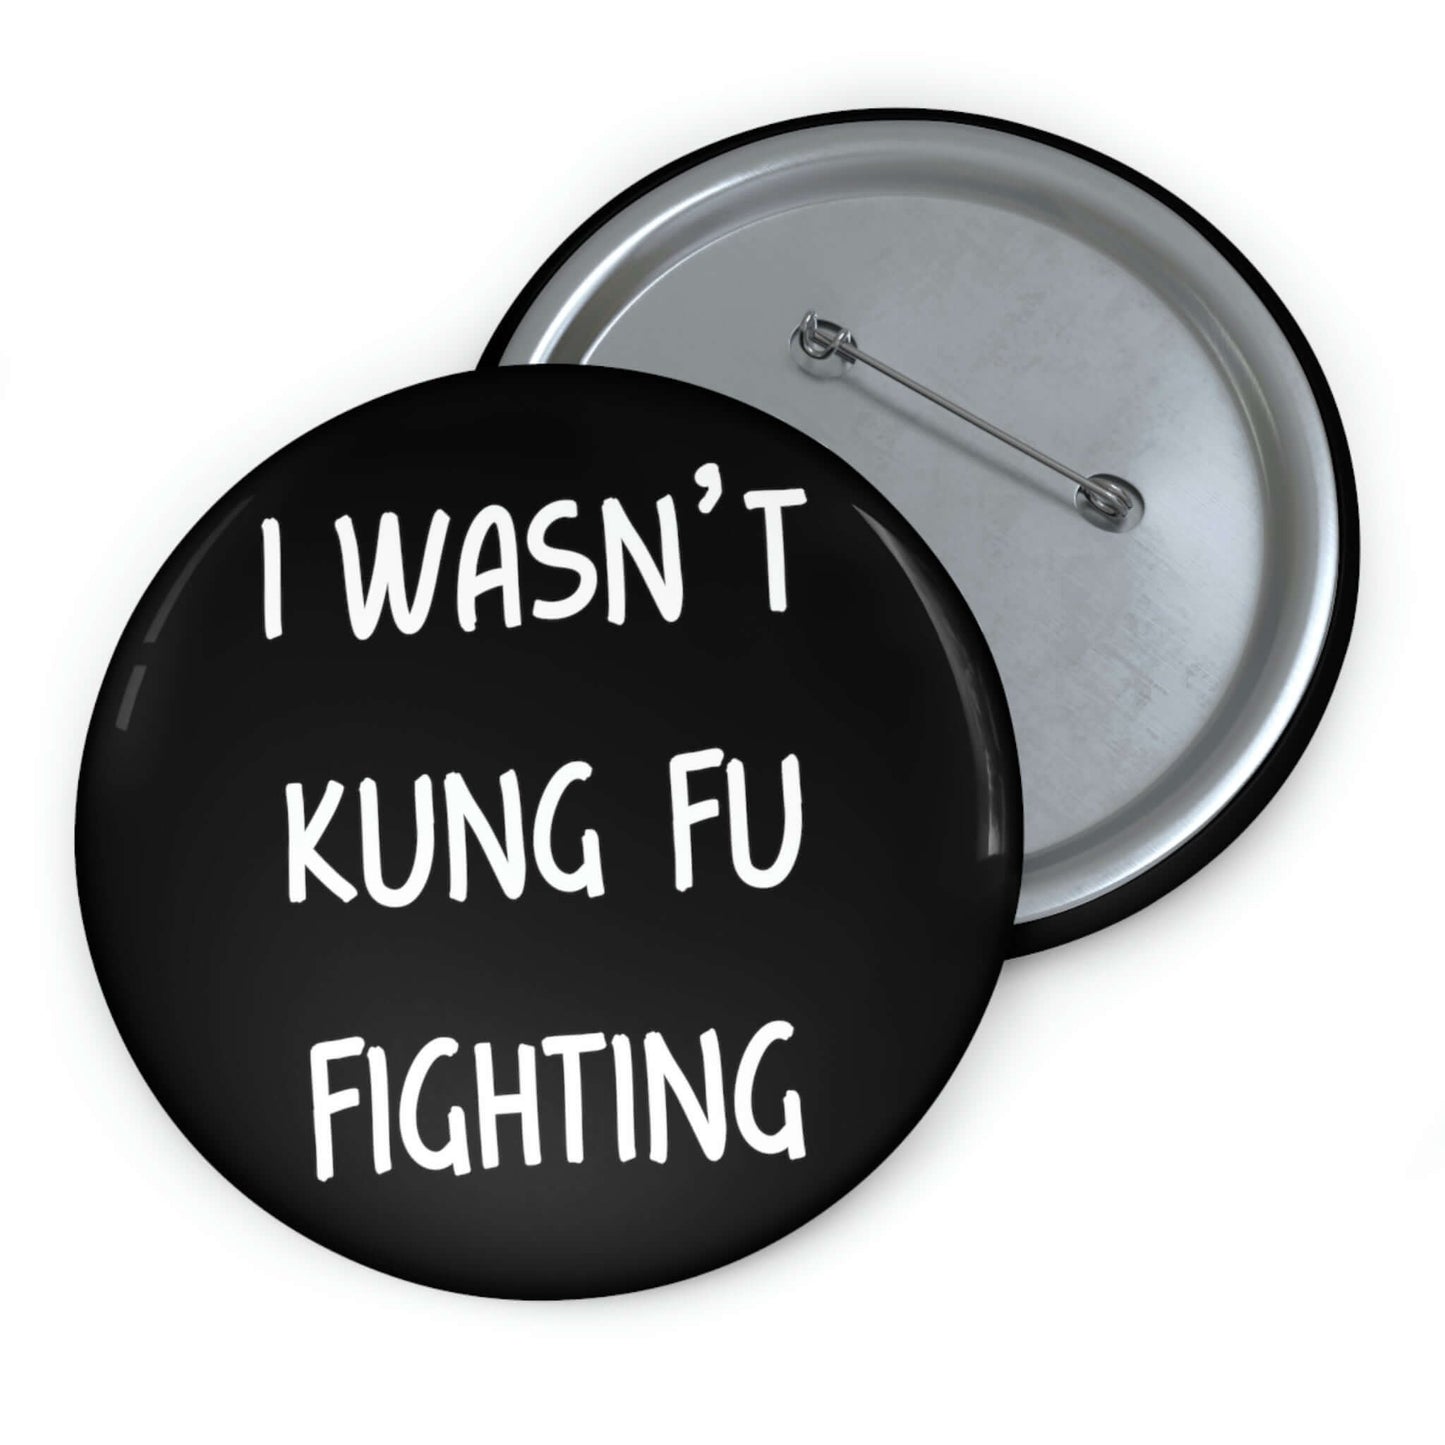 Kung fu fighting sarcastic pinback button